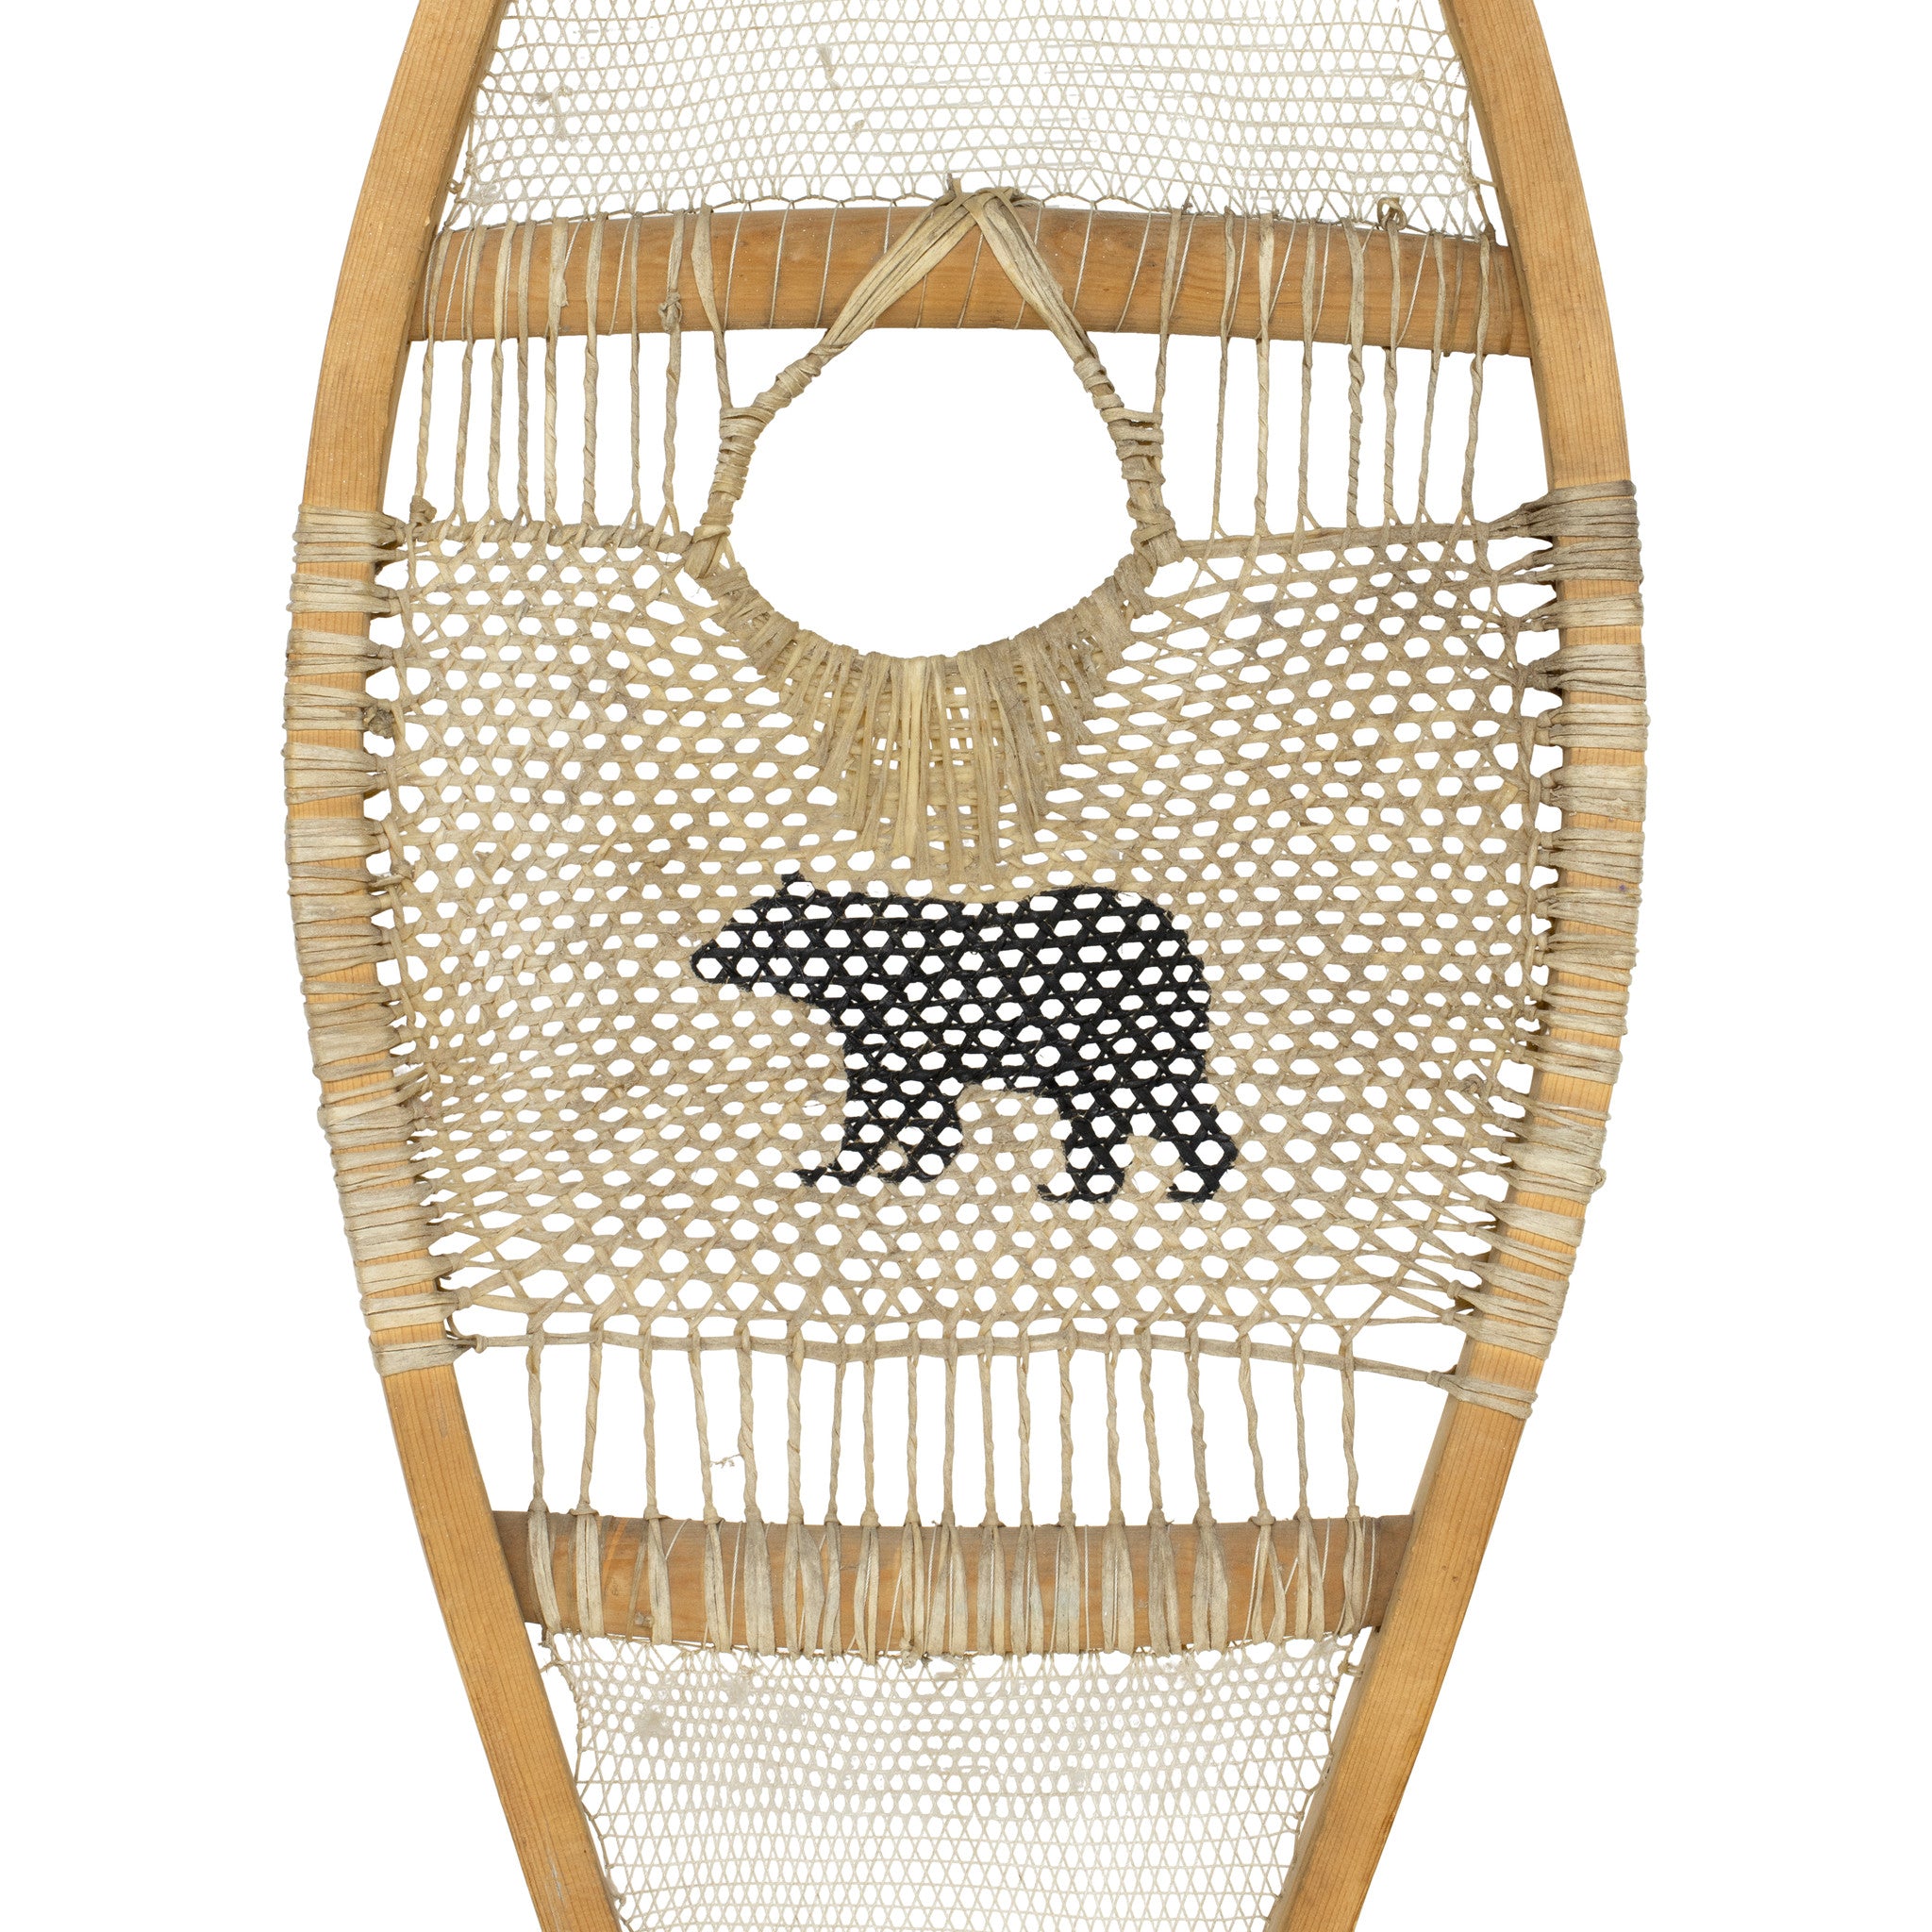 Native American Snowshoes